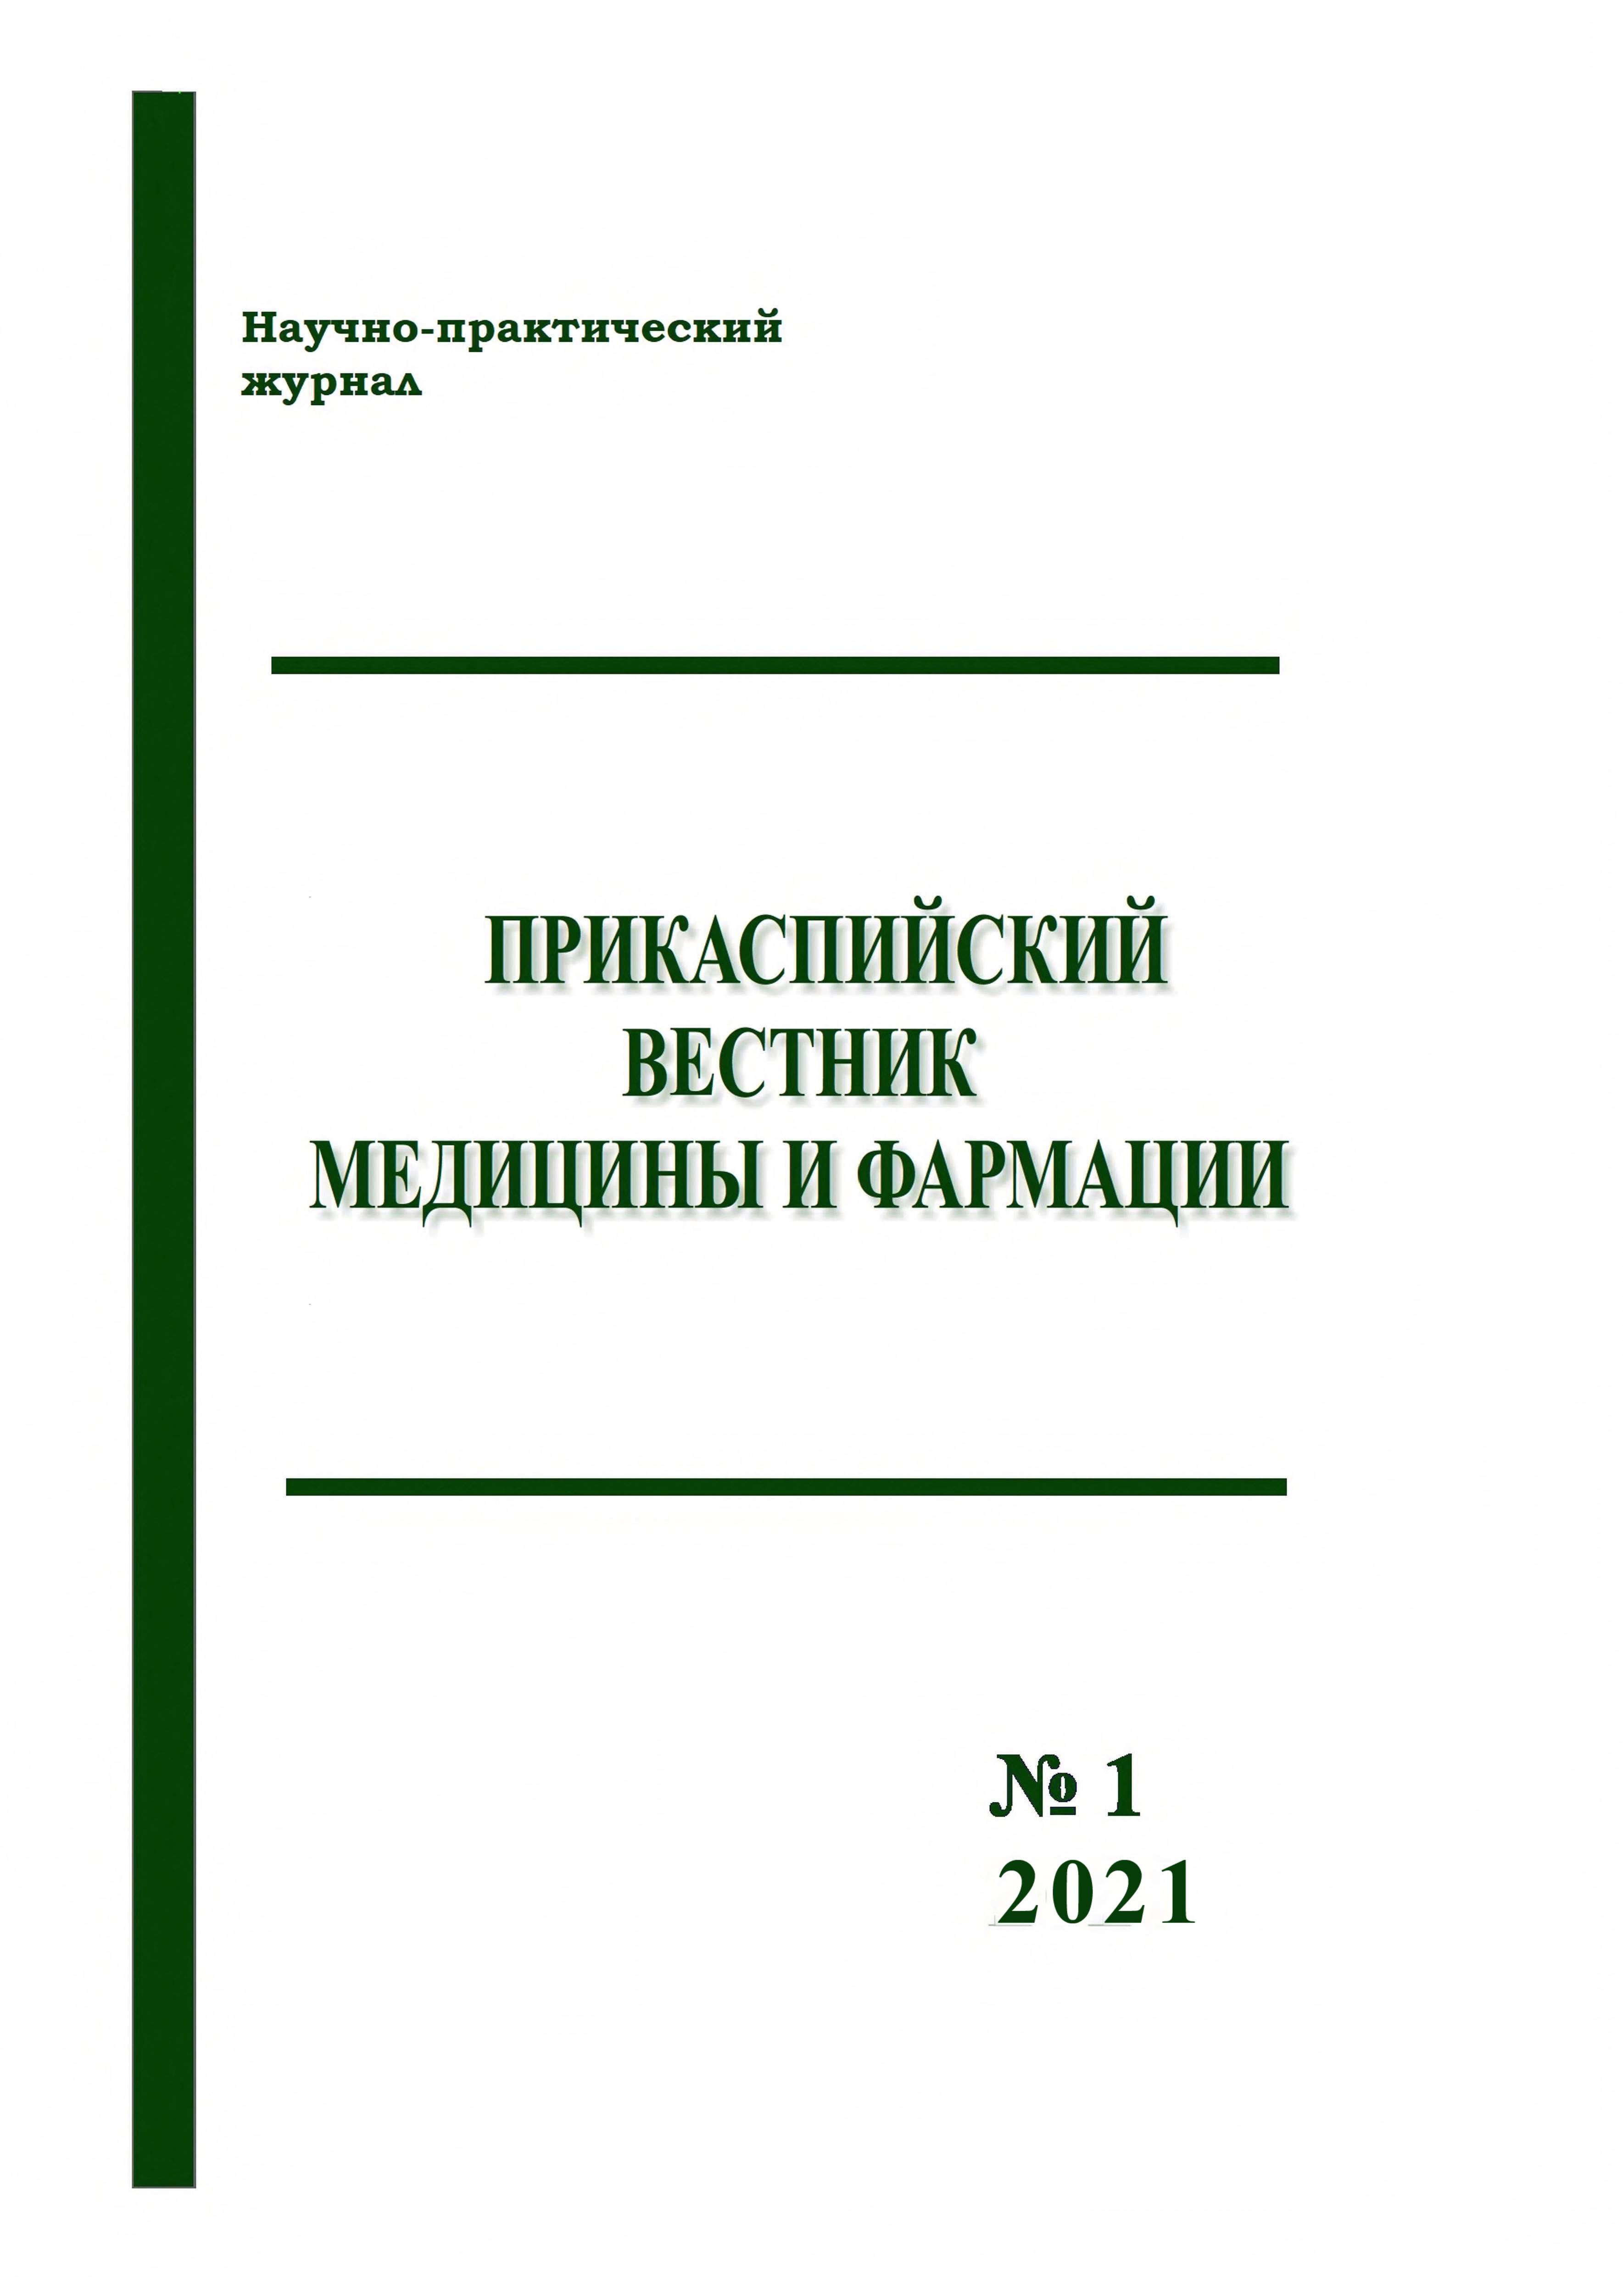                         QUALITY AND SAFETY CONTROL OF MEDICAL ACTIVITIES IN THE STATE BUDGETARY INSTITUTION OF HEALTHCARE OF ASTRAKHAN REGION «REGIONAL BLOOD CENTER» IN 2018-2020
            